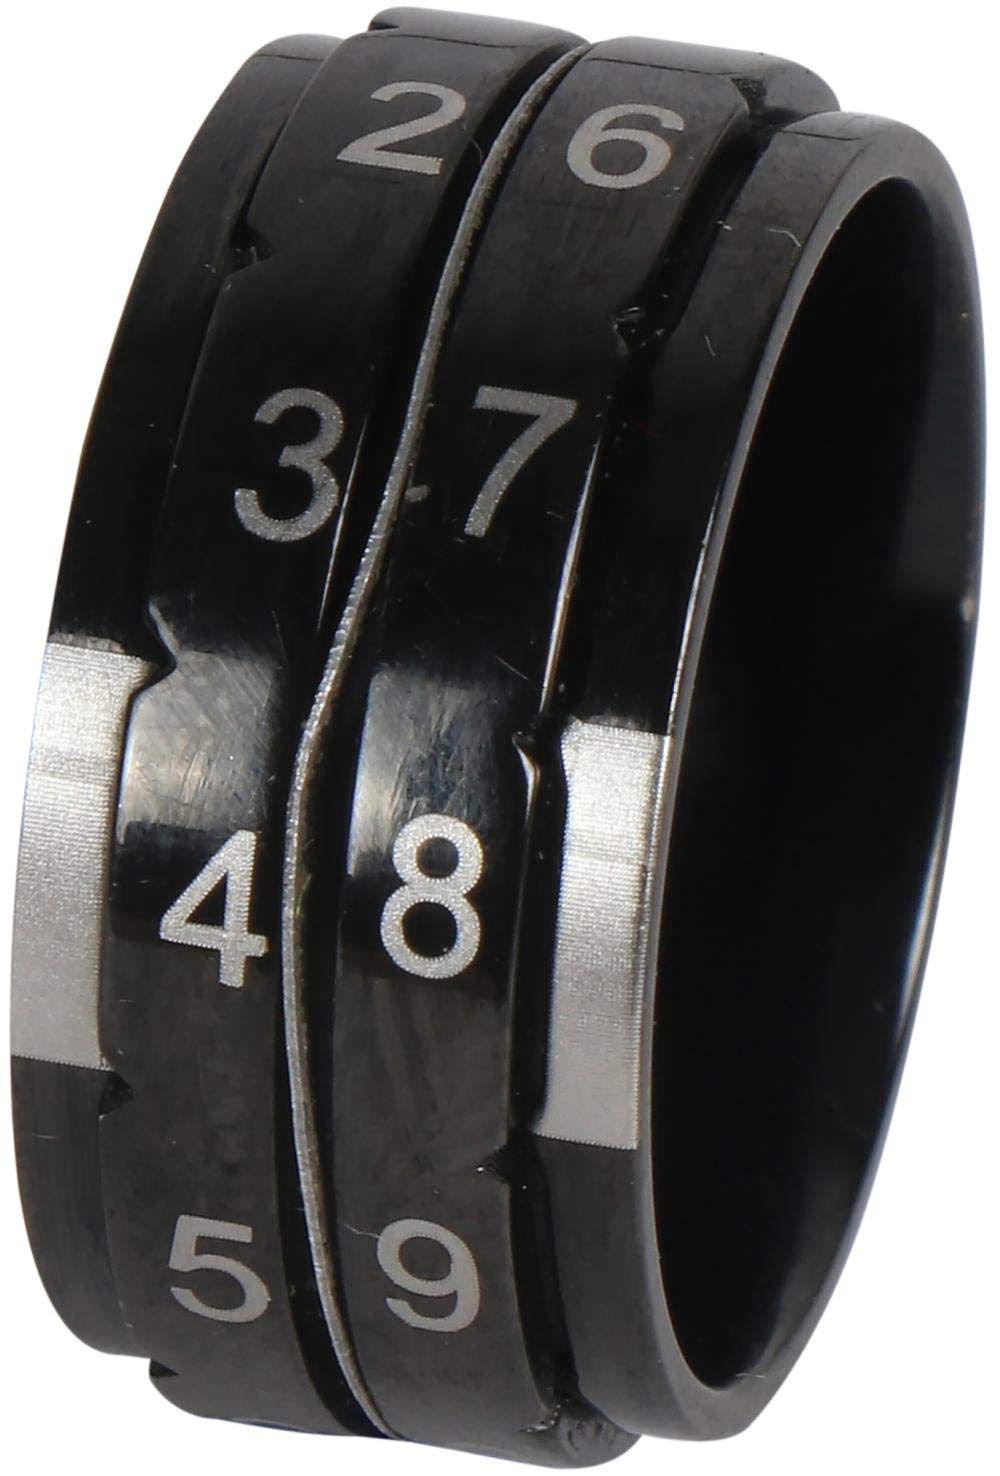 Knitter's Pride Row Counter Ring-Size 9: 19.0mm Diameter